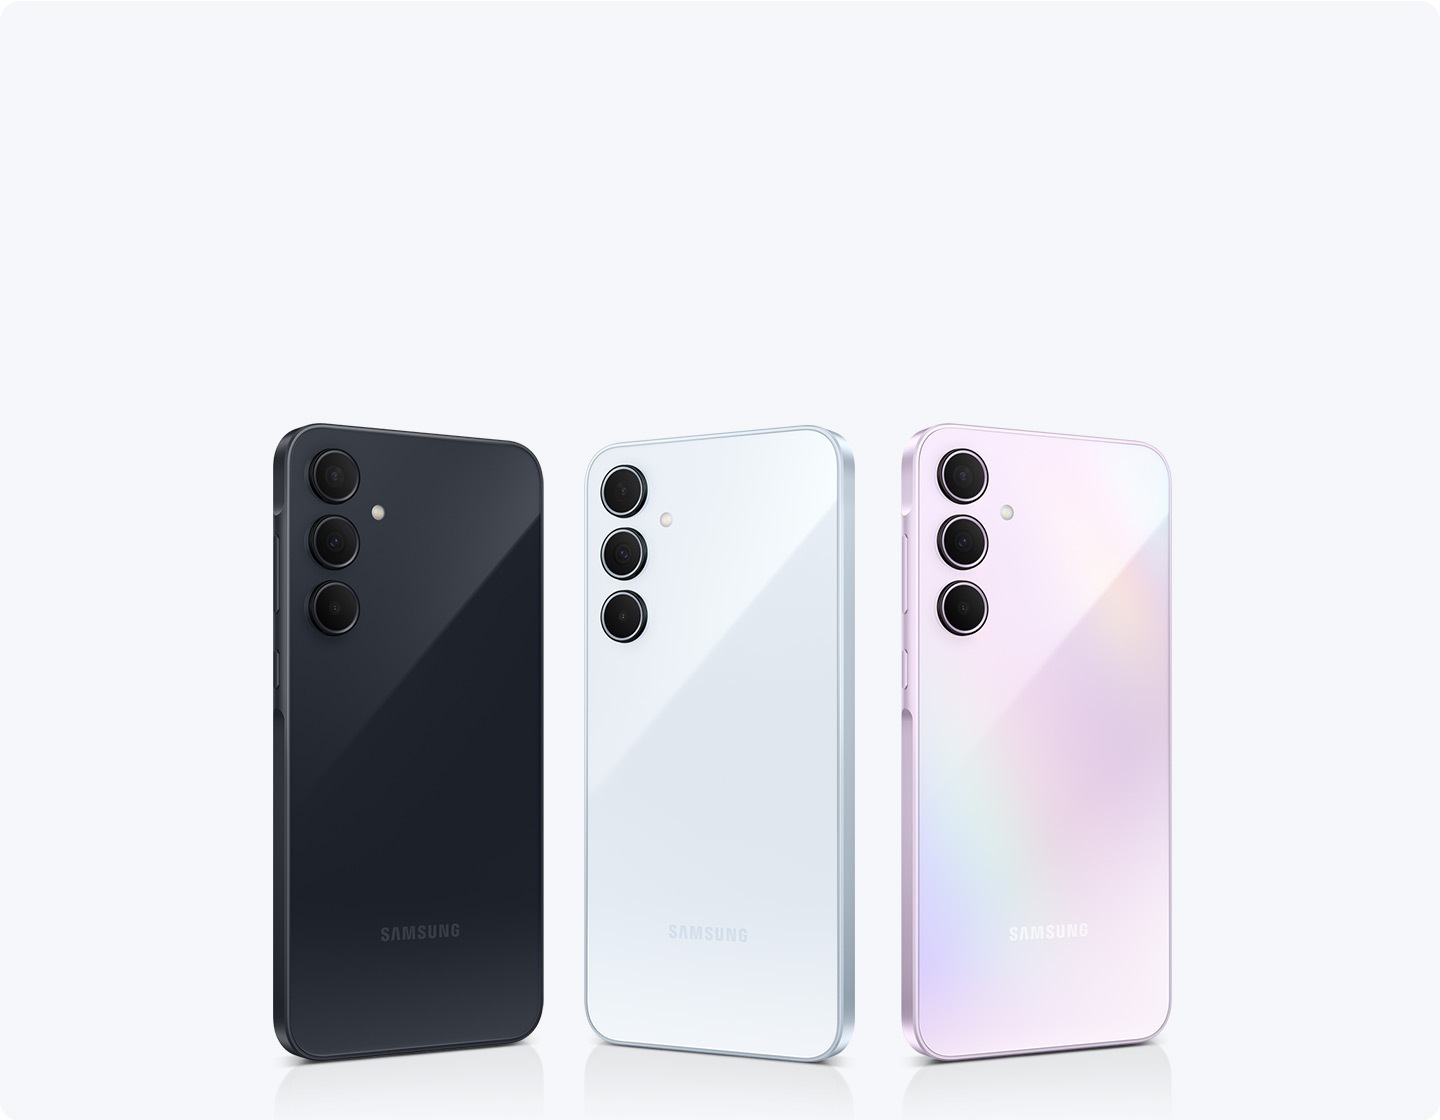 Three Samsung Galaxy A35 smartphones are in a row with varying colors: Awesome Navy, Awesome Iceblue, and Awesome Lilac. Each Galaxy A35 phone features a 3-camera layout on the back.